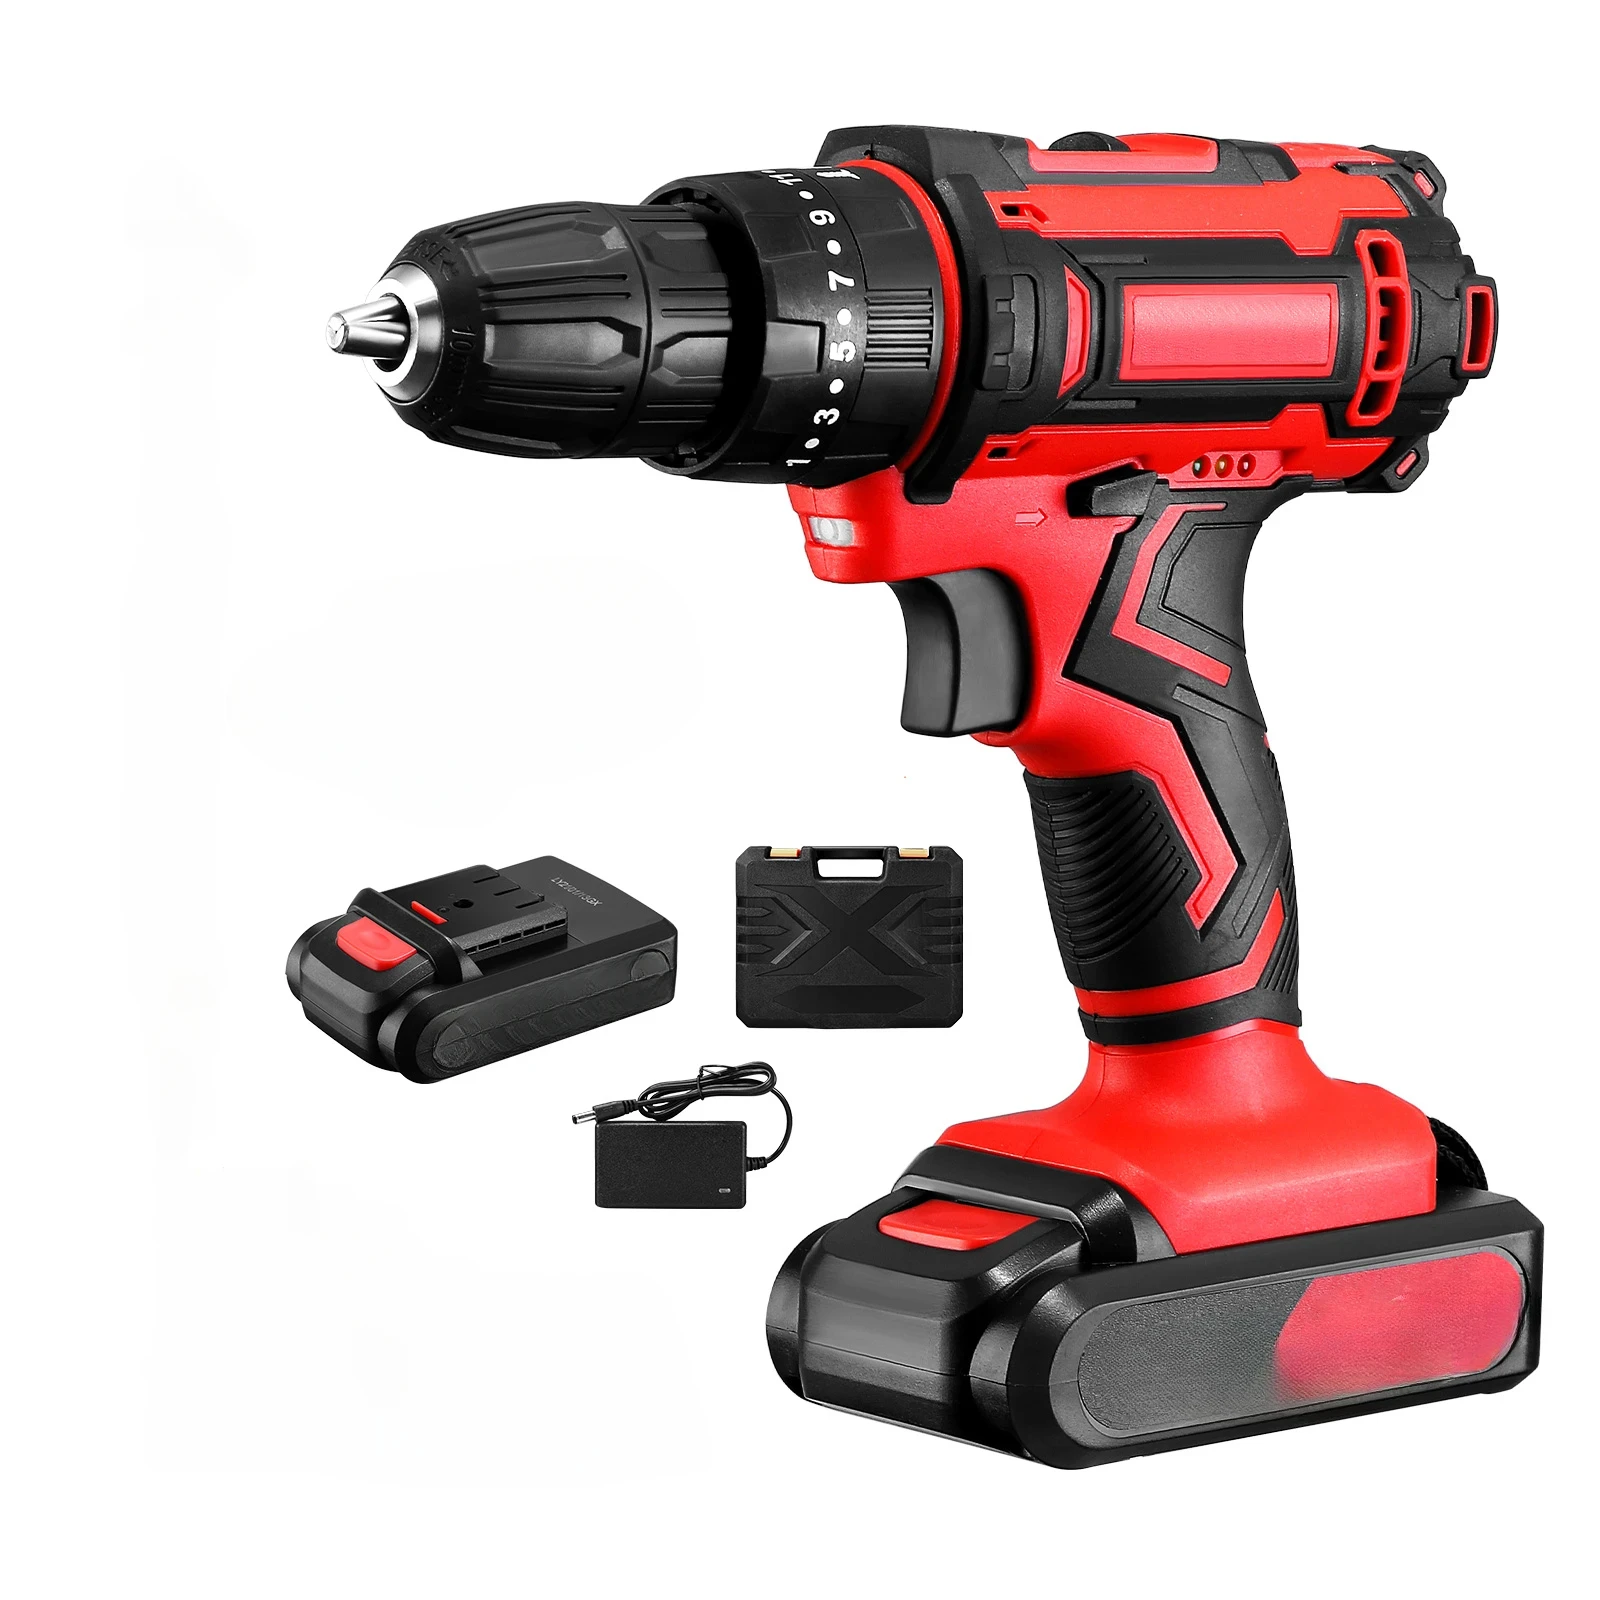 

21V 12V Impact Cordless Drill Power Tools Wireless Drills Rechargeable Drill Set for Electric Screwdriver Battery Driller Tool